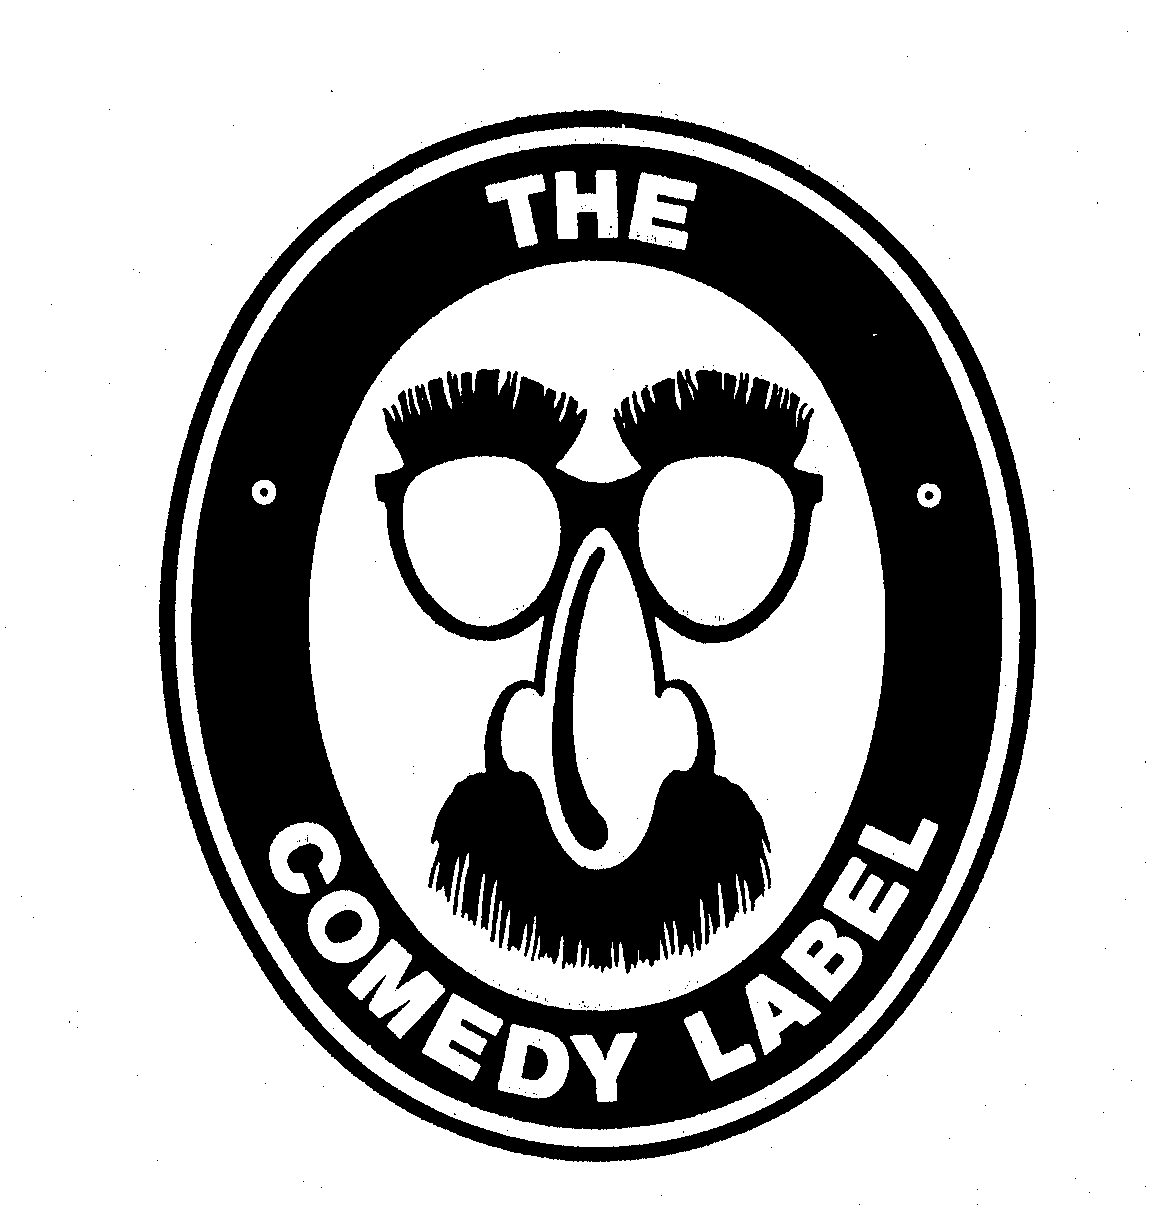  THE COMEDY LABEL